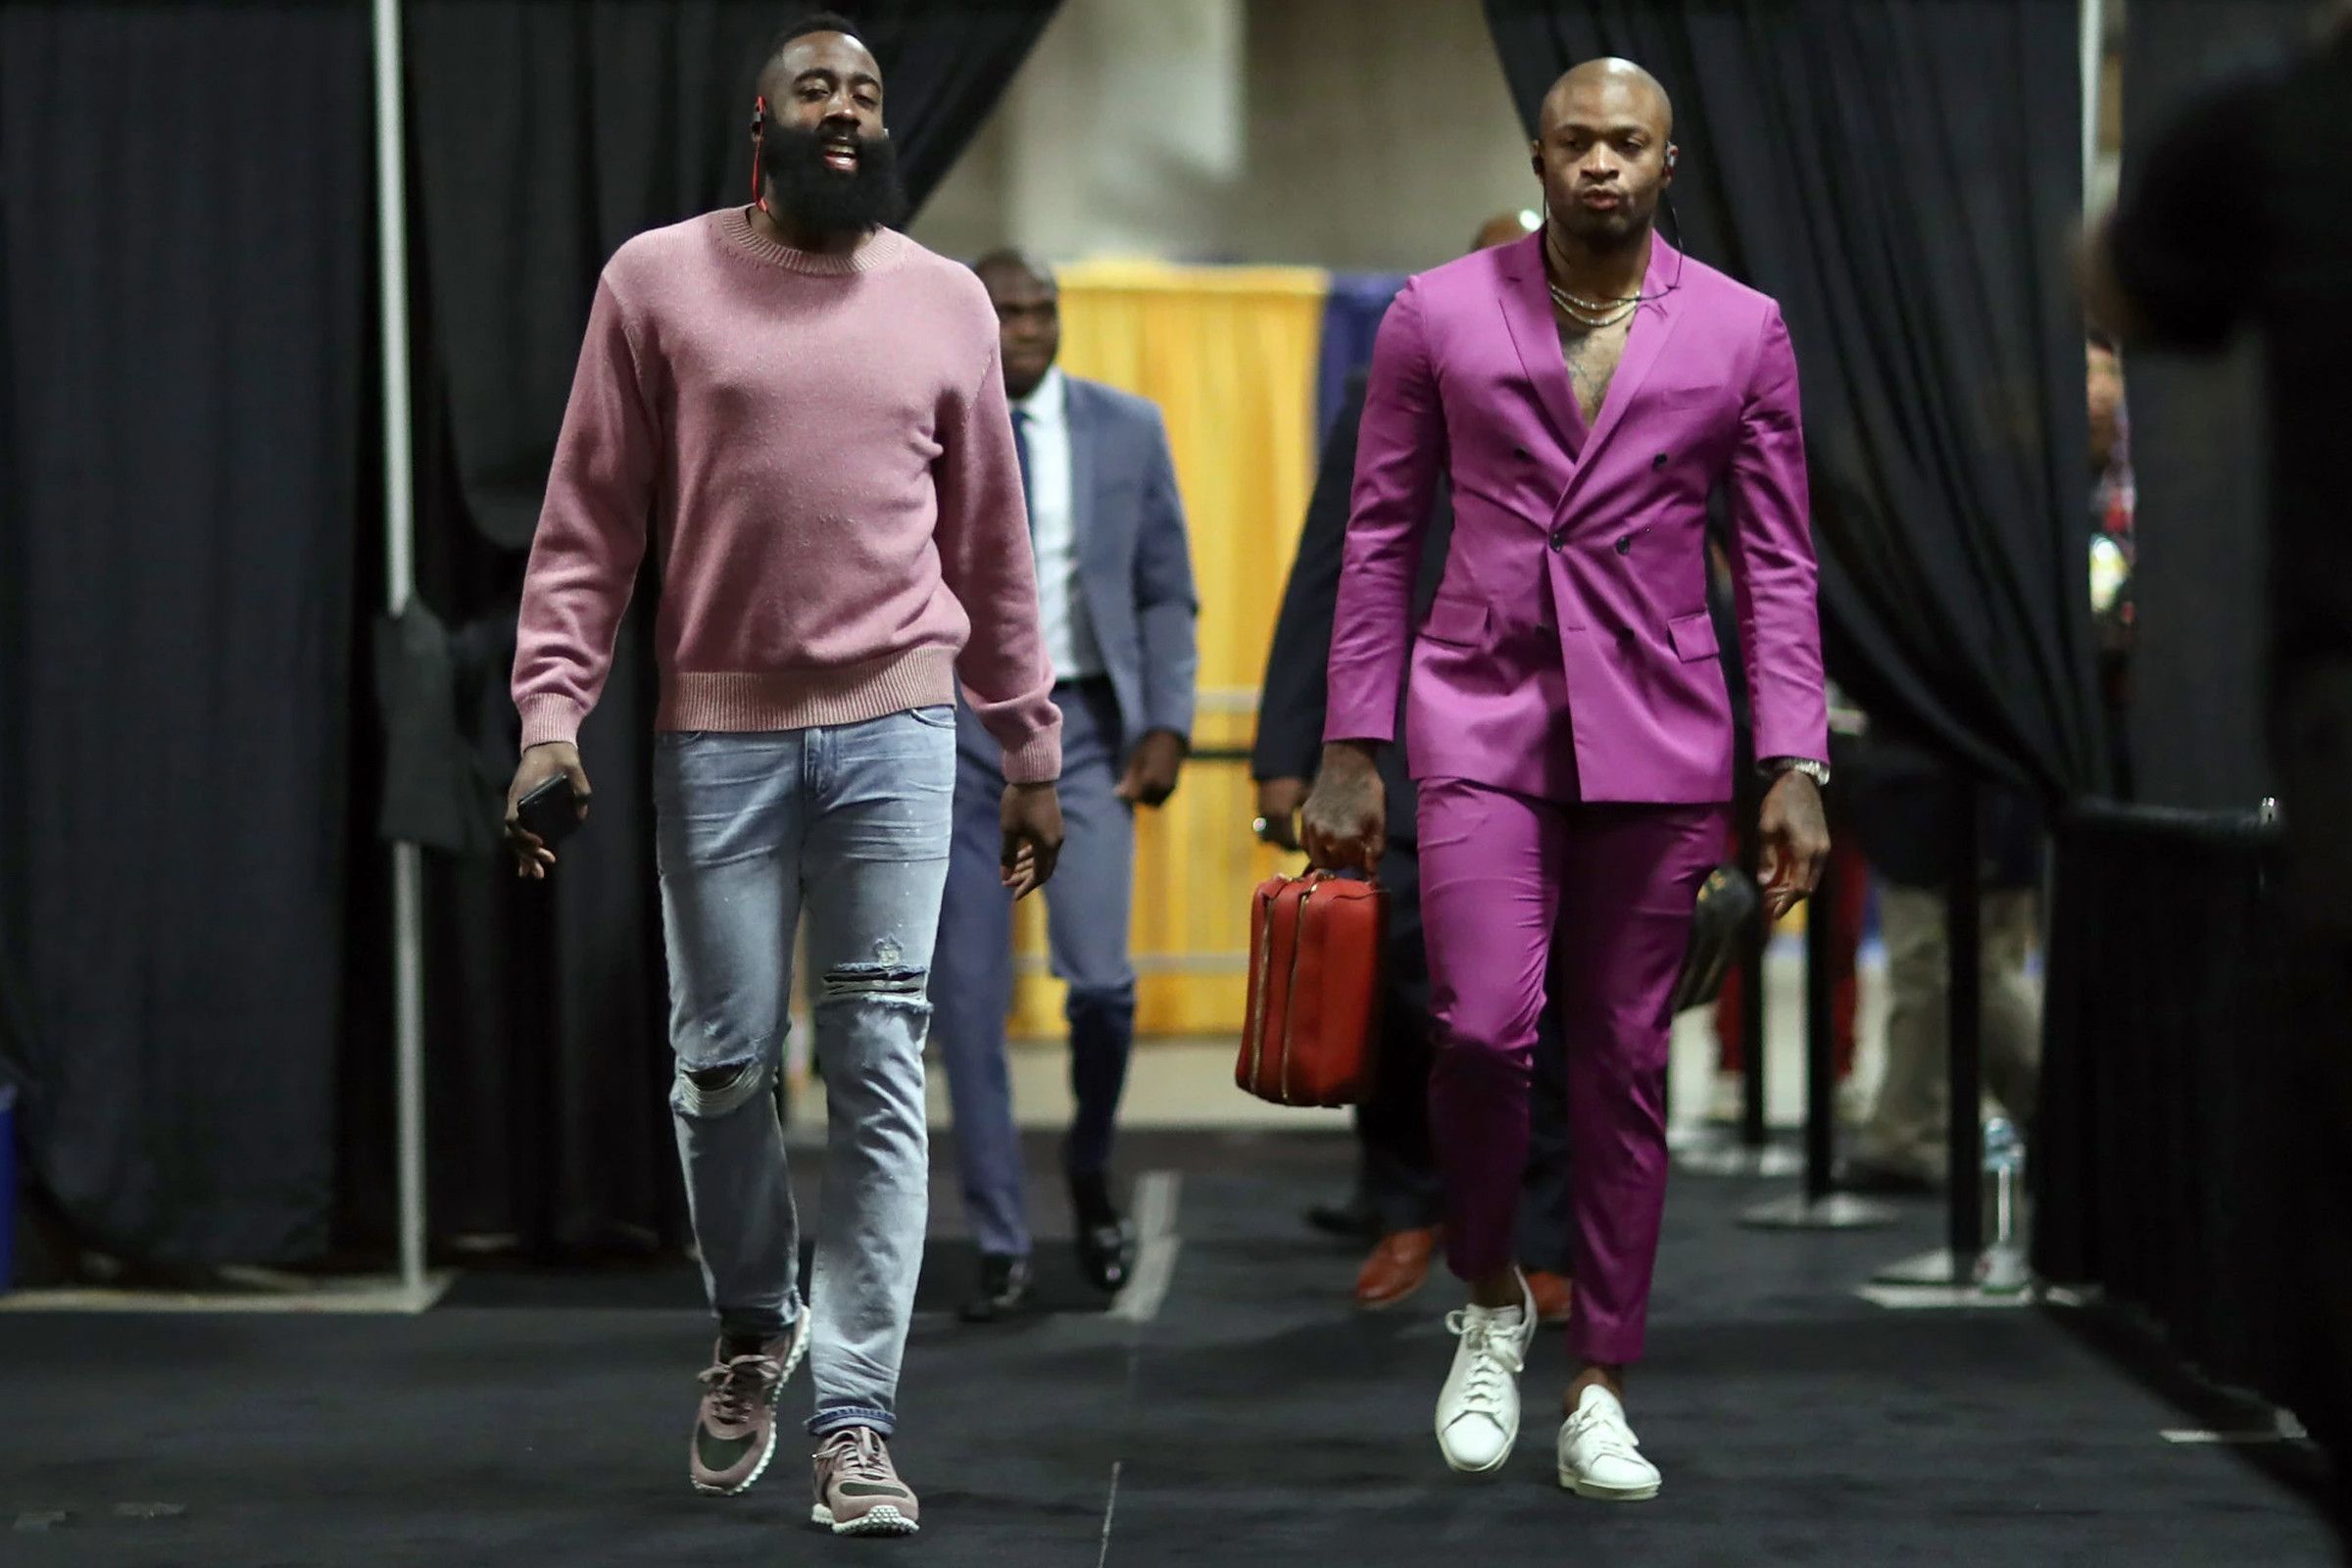 3 Dress Code Changes We'd Like to See the NBA Make